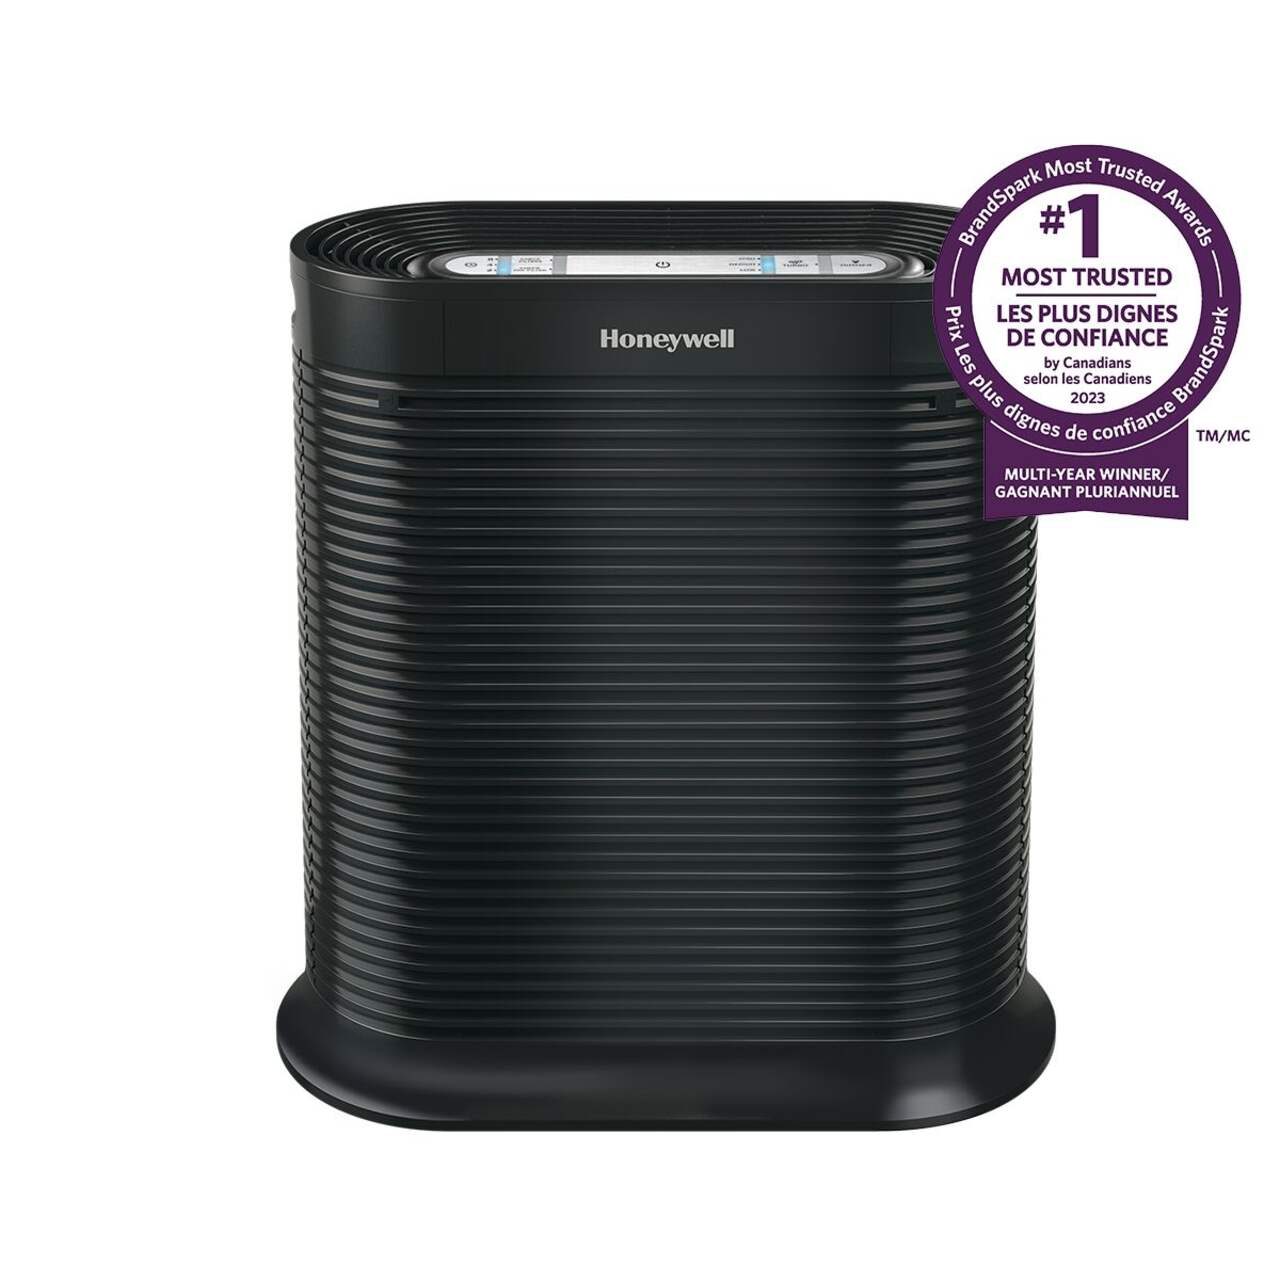 Honeywell HEPA Air Purifier for Allergies, Dust and Pet Hair - HPA300